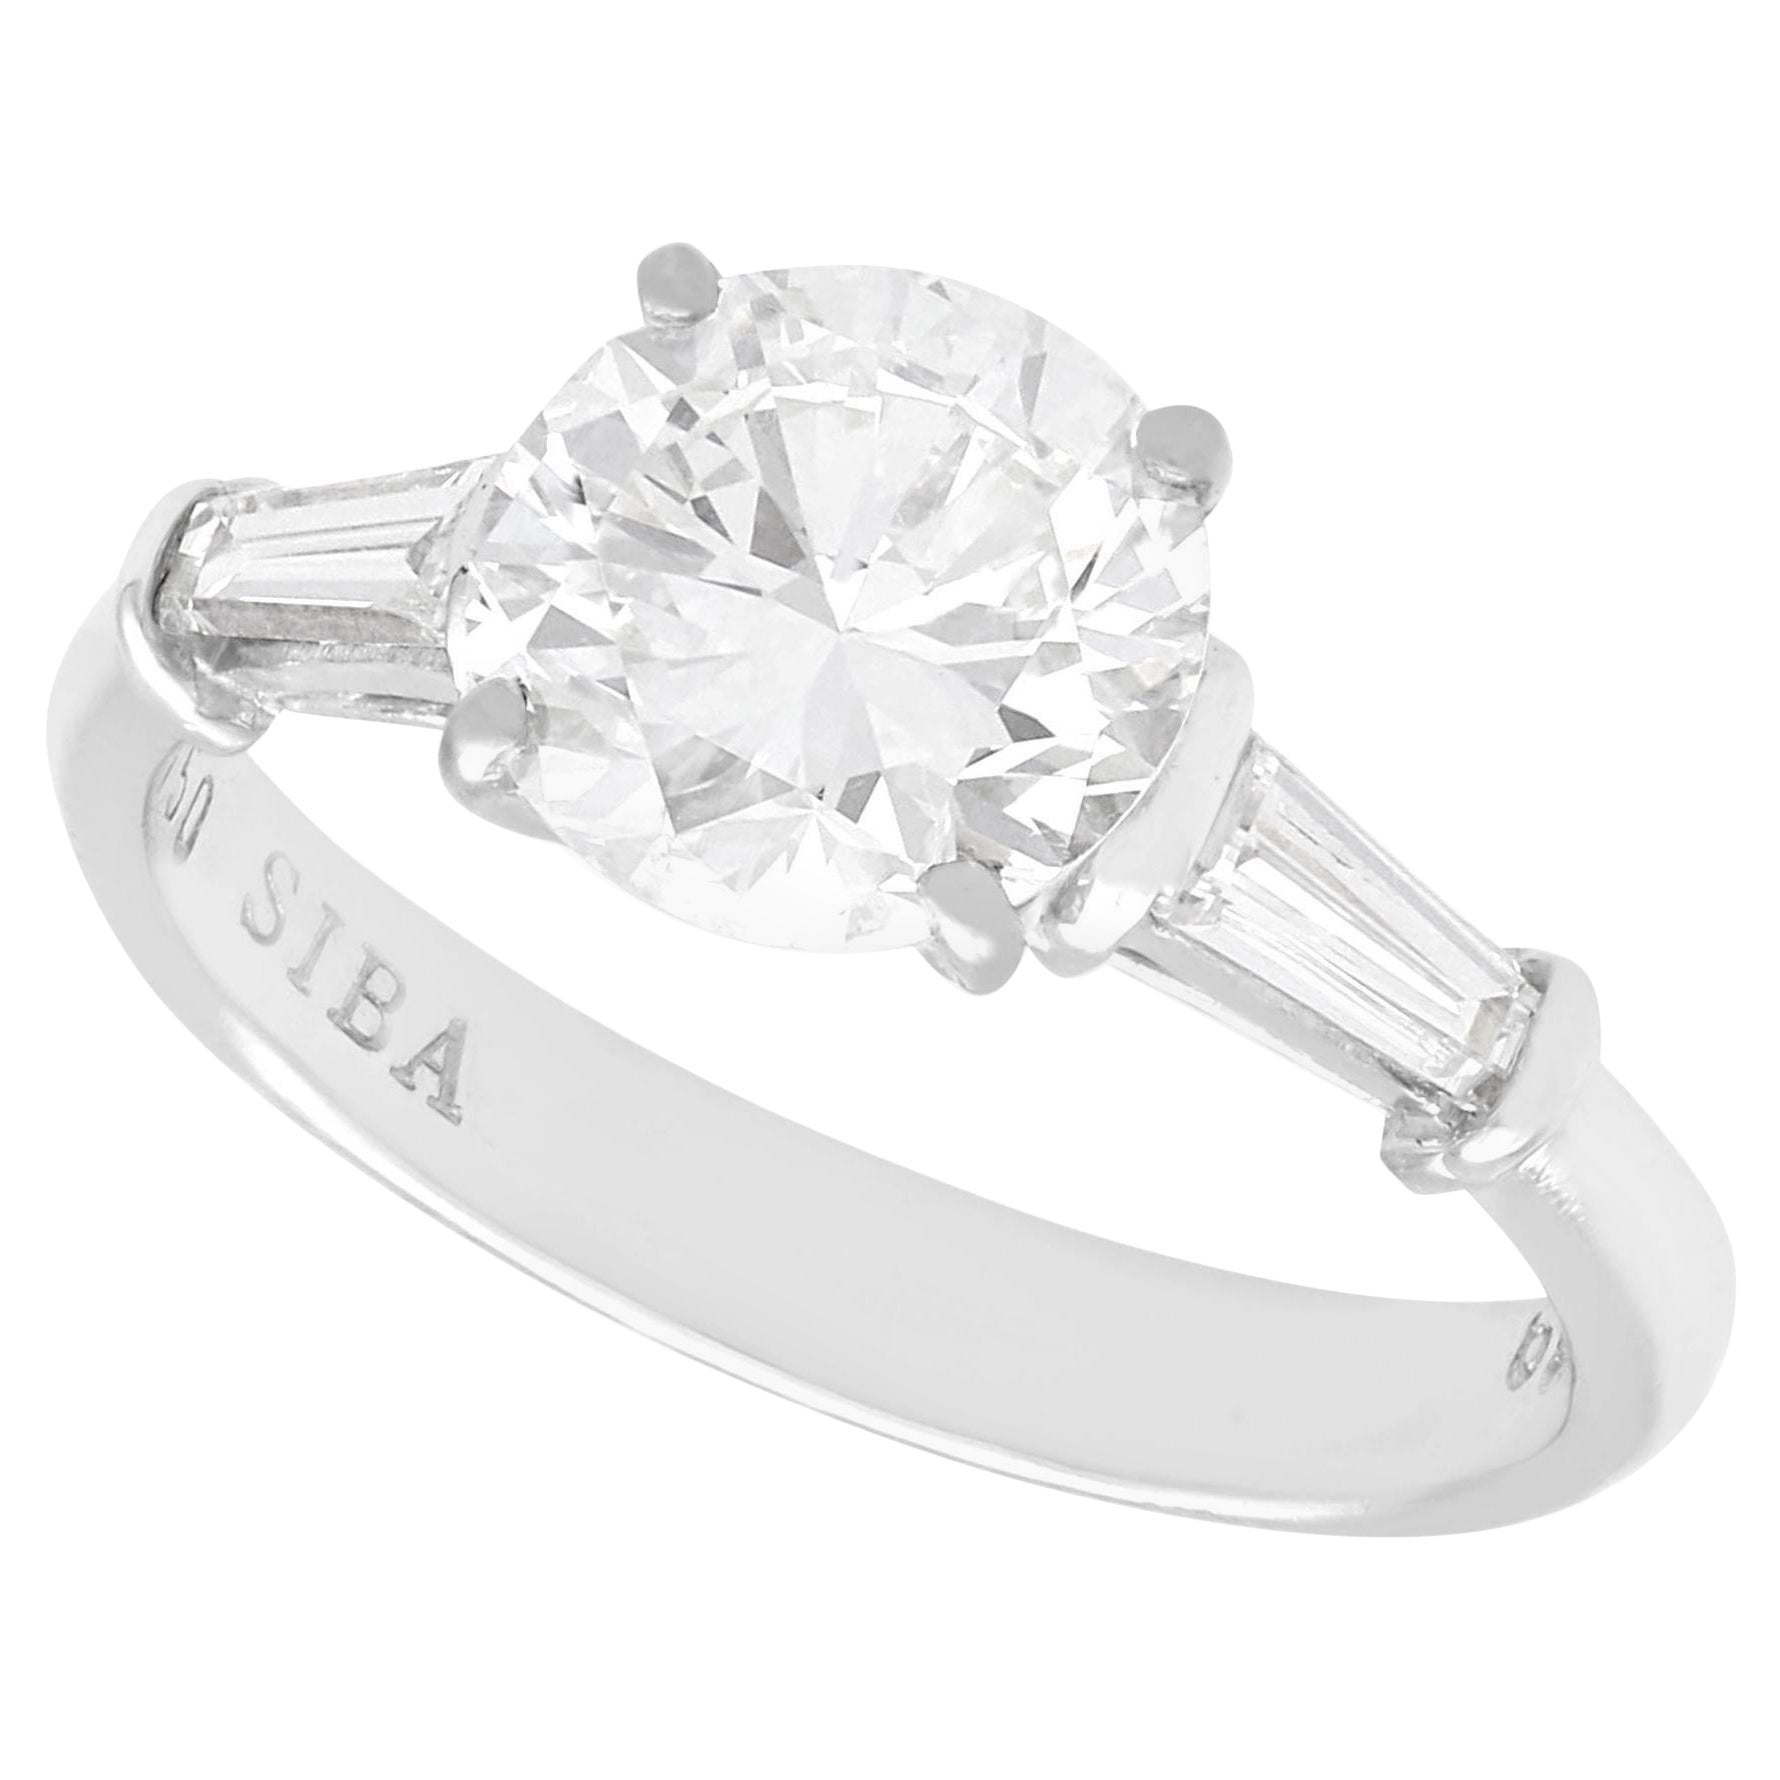 Vintage and Contemporary 1.94 Carat Diamond and 18K White Gold Solitaire Ring